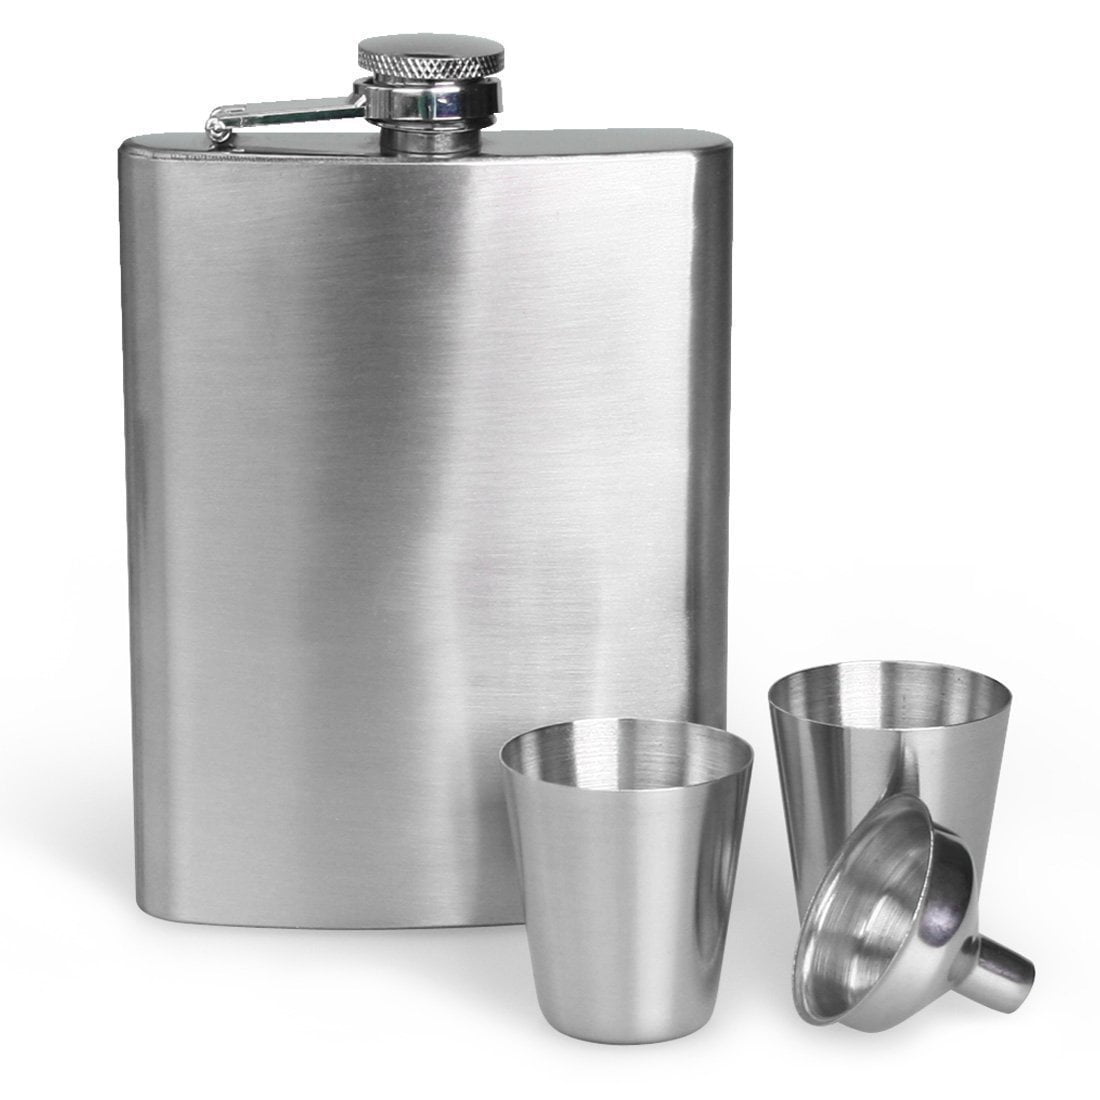 NEW Lot of 5 Maxam Black Wrap Stainless Steel Alcohol FLASKS Set 8 oz Groom GIFT 